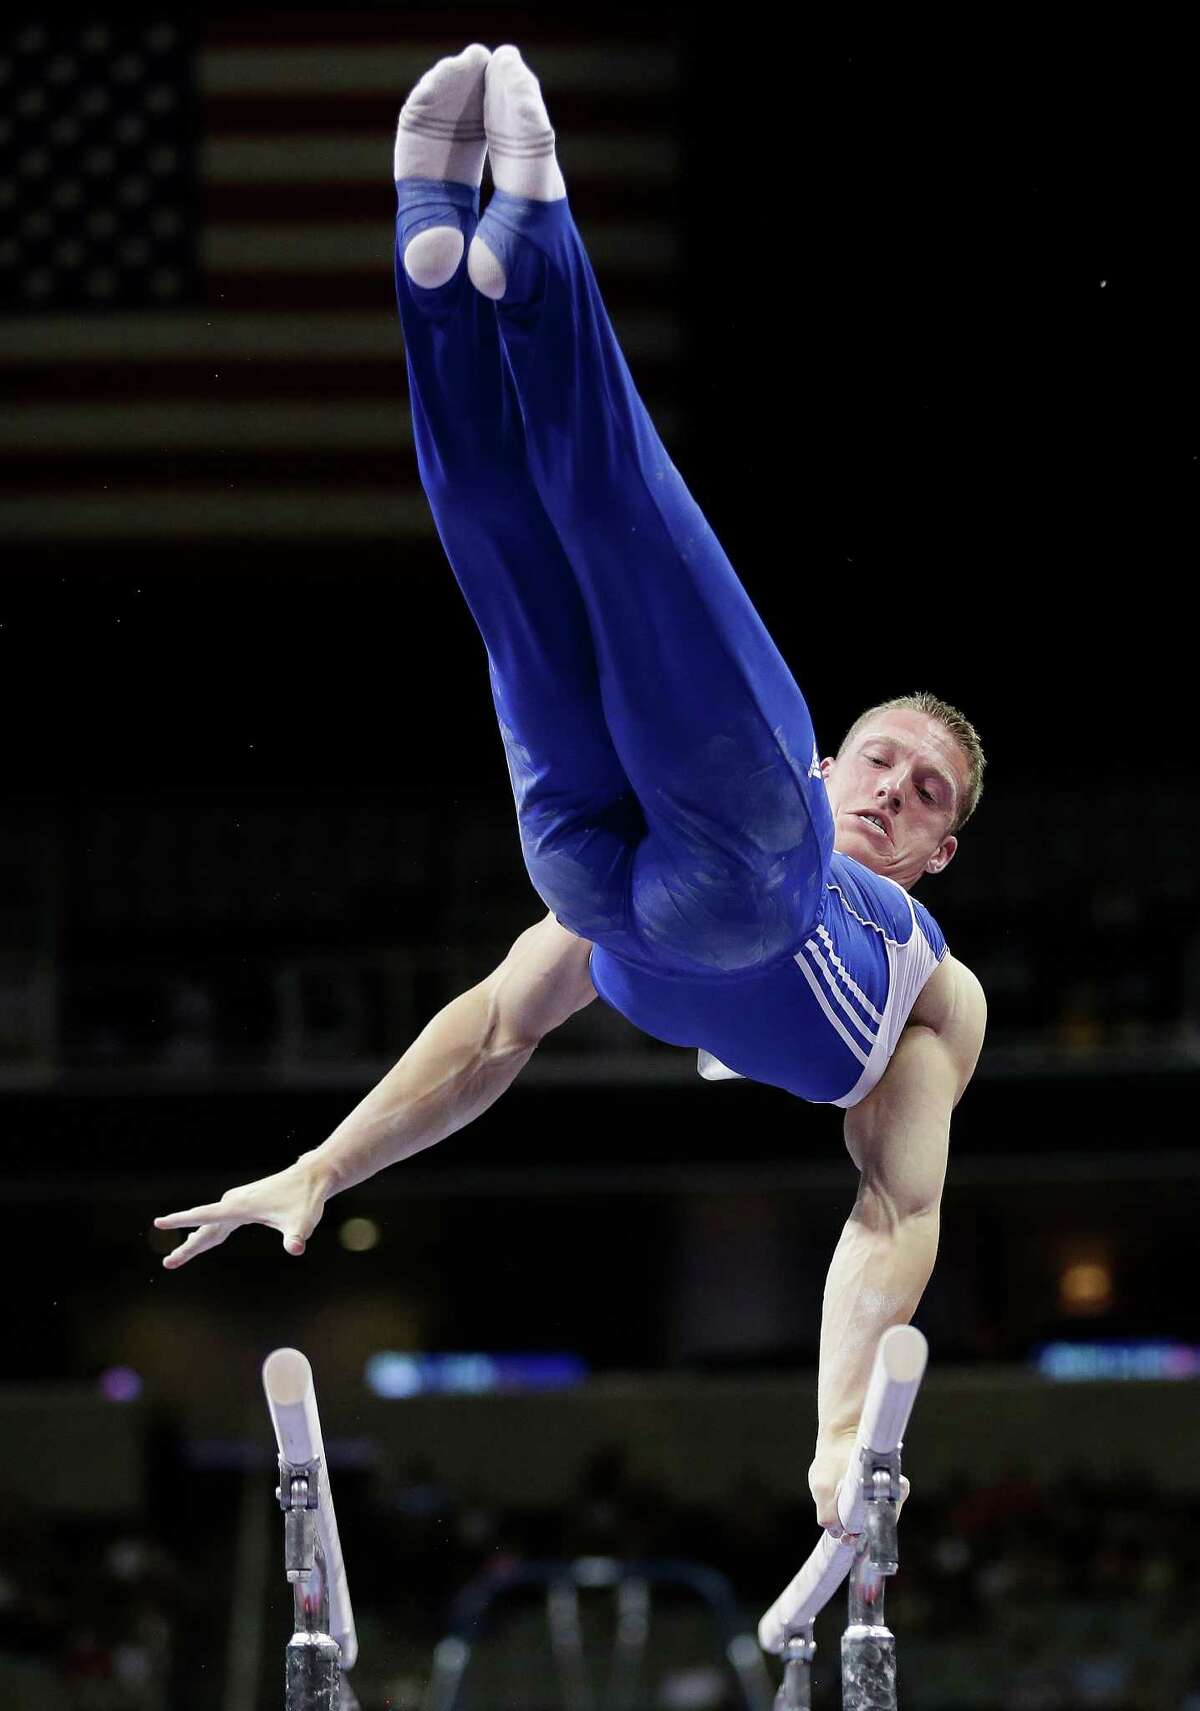 Steve Legendre competes on the parallel bars during the preliminary round of the men's Olympic gymnastics trials Thursday, June 28, 2012, in San Jose, Calif. (AP Photo/Gregory Bull)